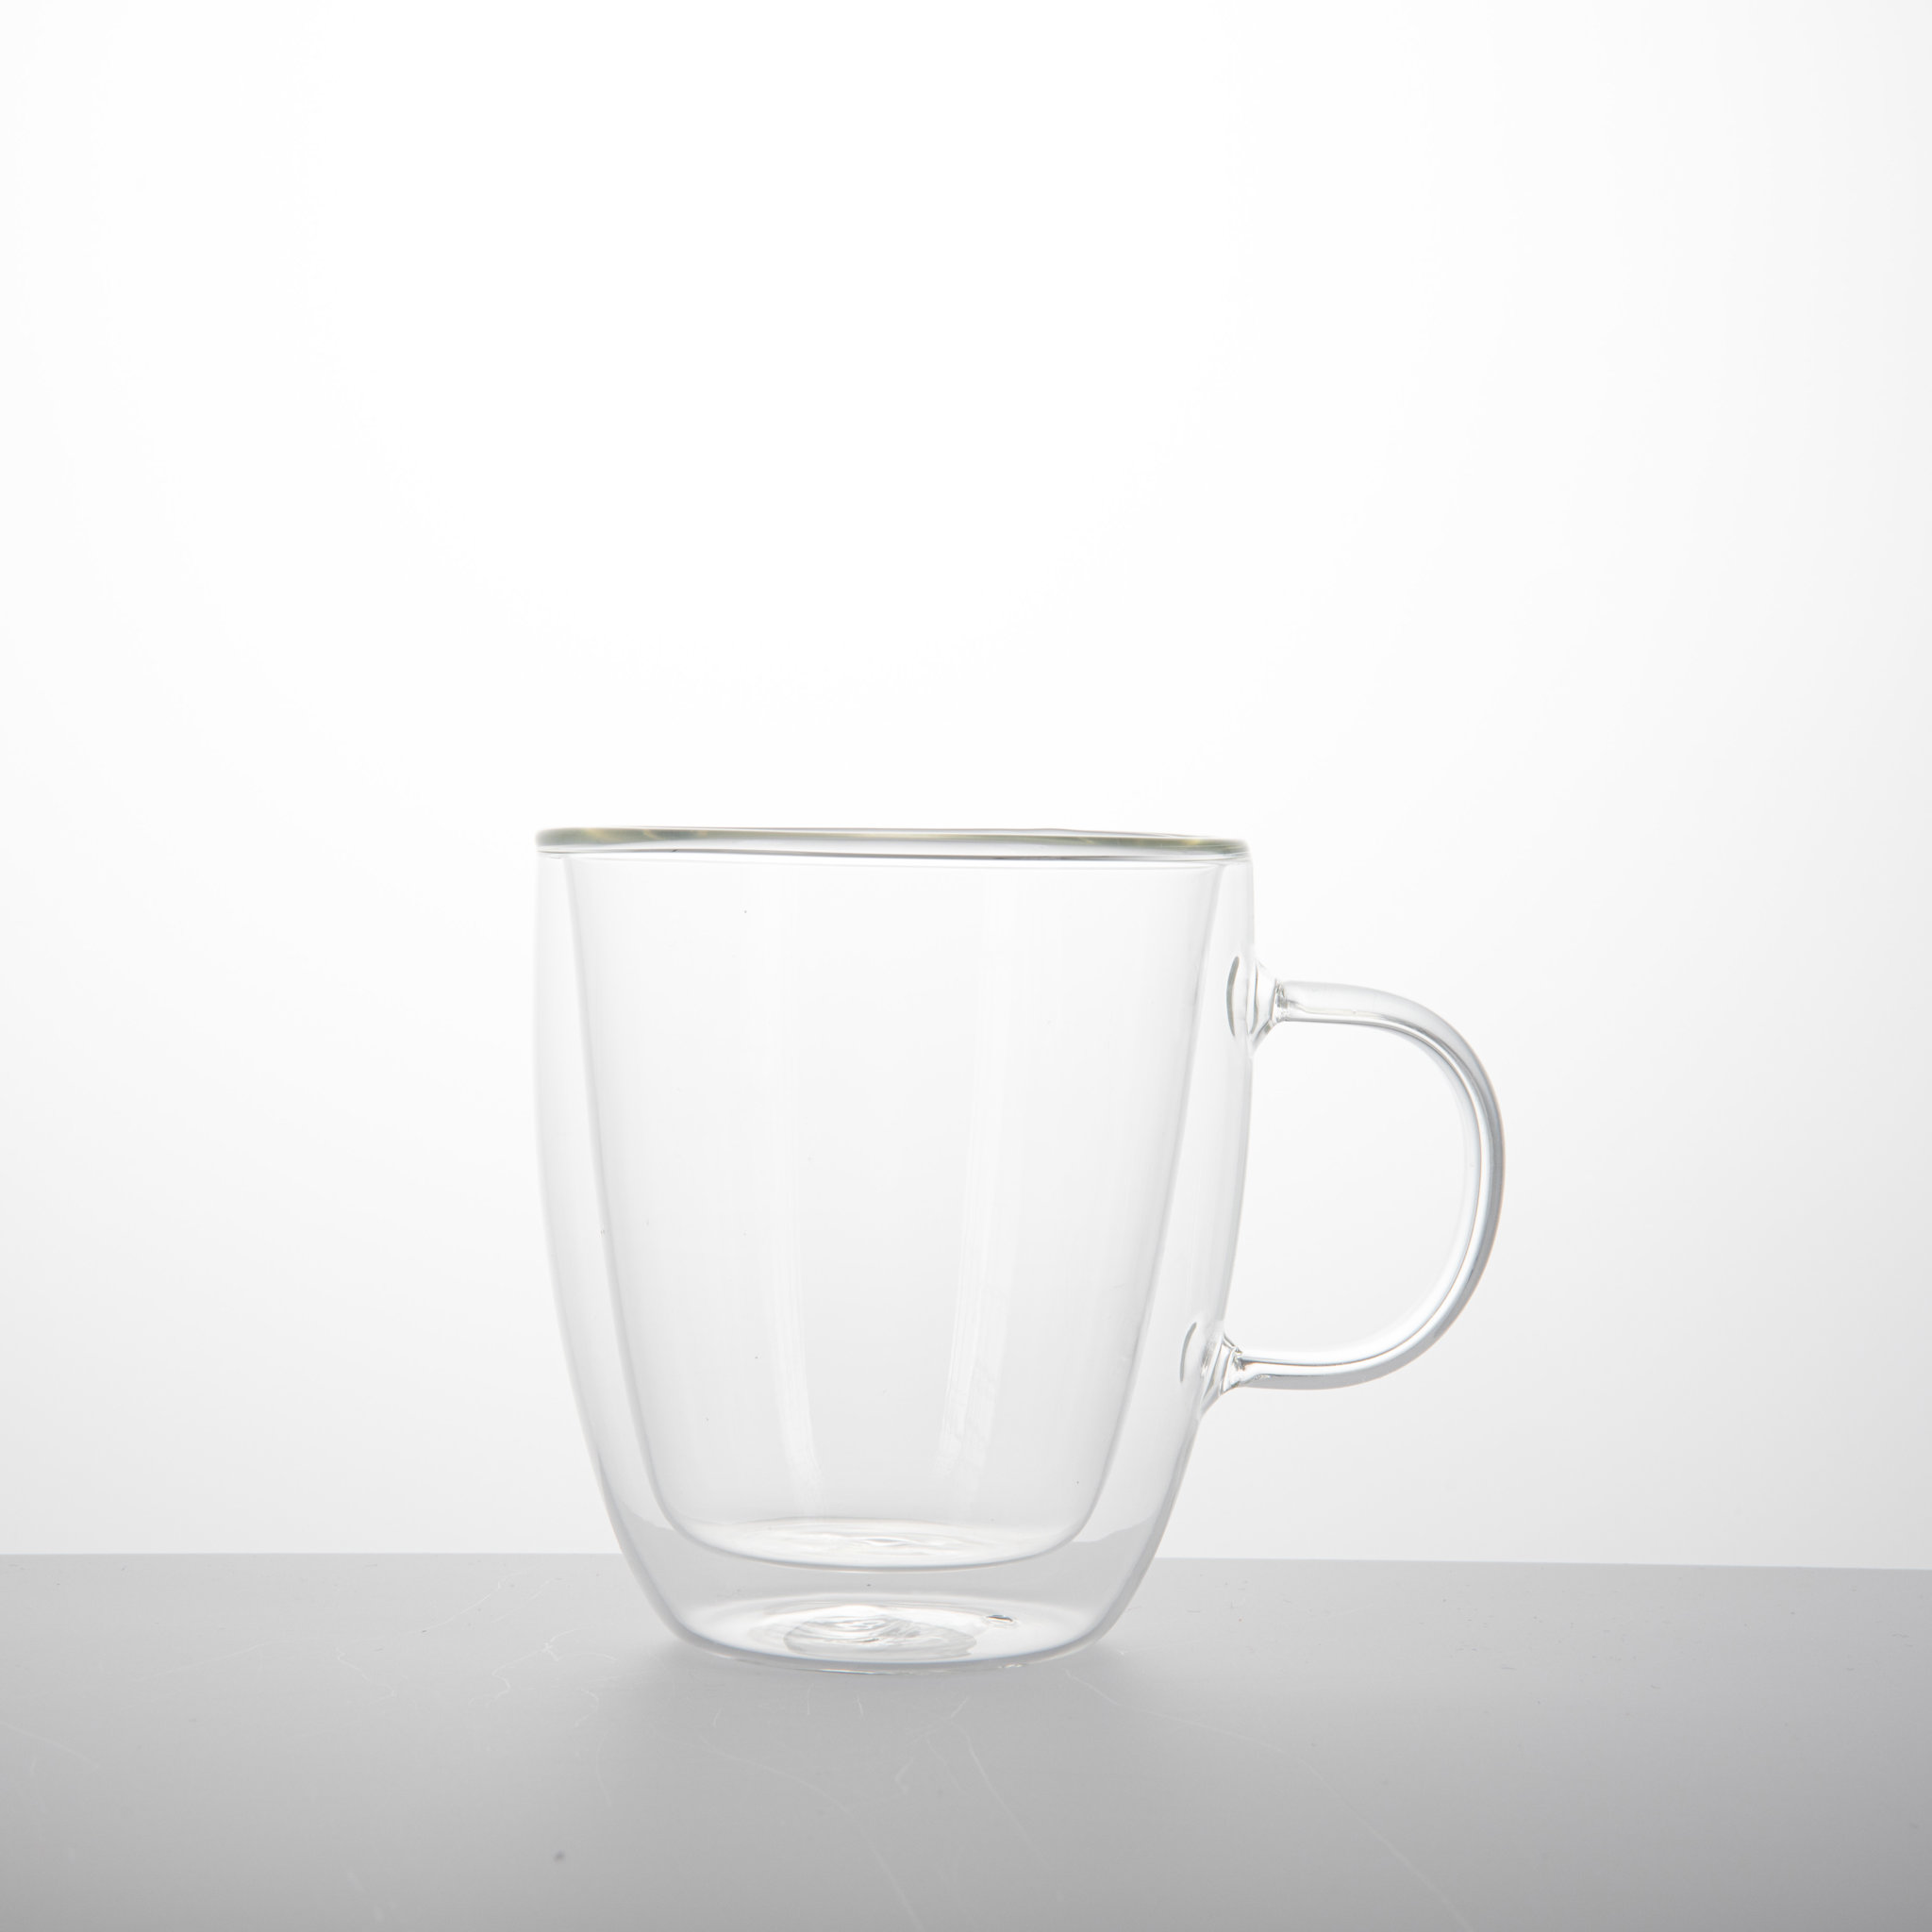 15 oz. Insulated Glass Coffee Cup With Handle2